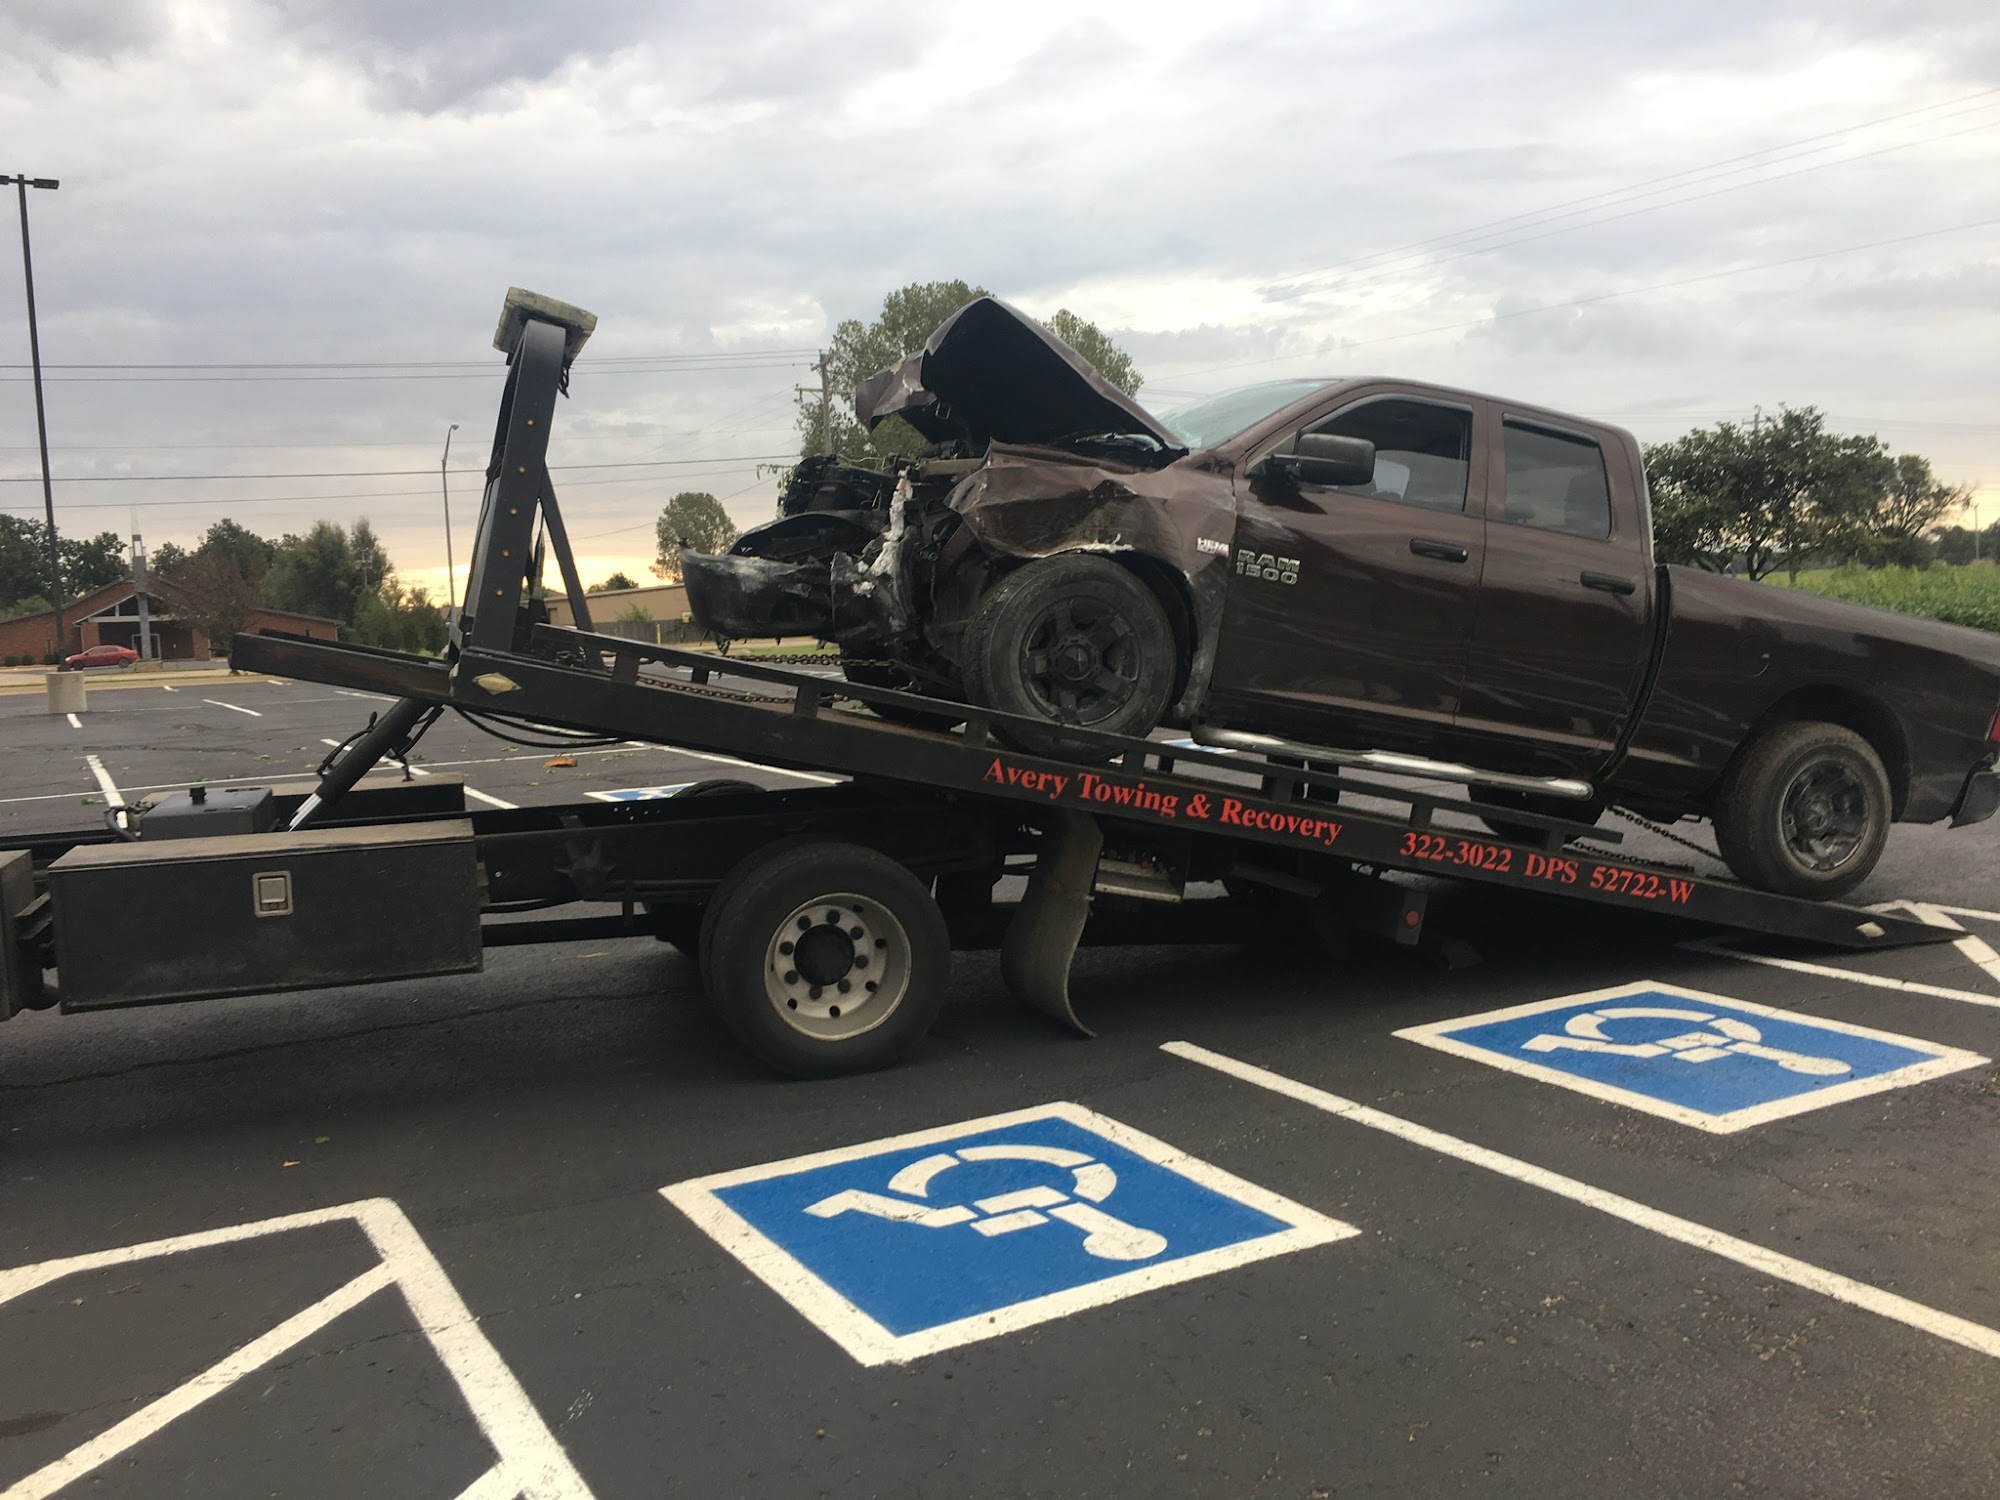 Avery Towing and Recovery 550 West 137th Street, Glenpool Oklahoma 74033